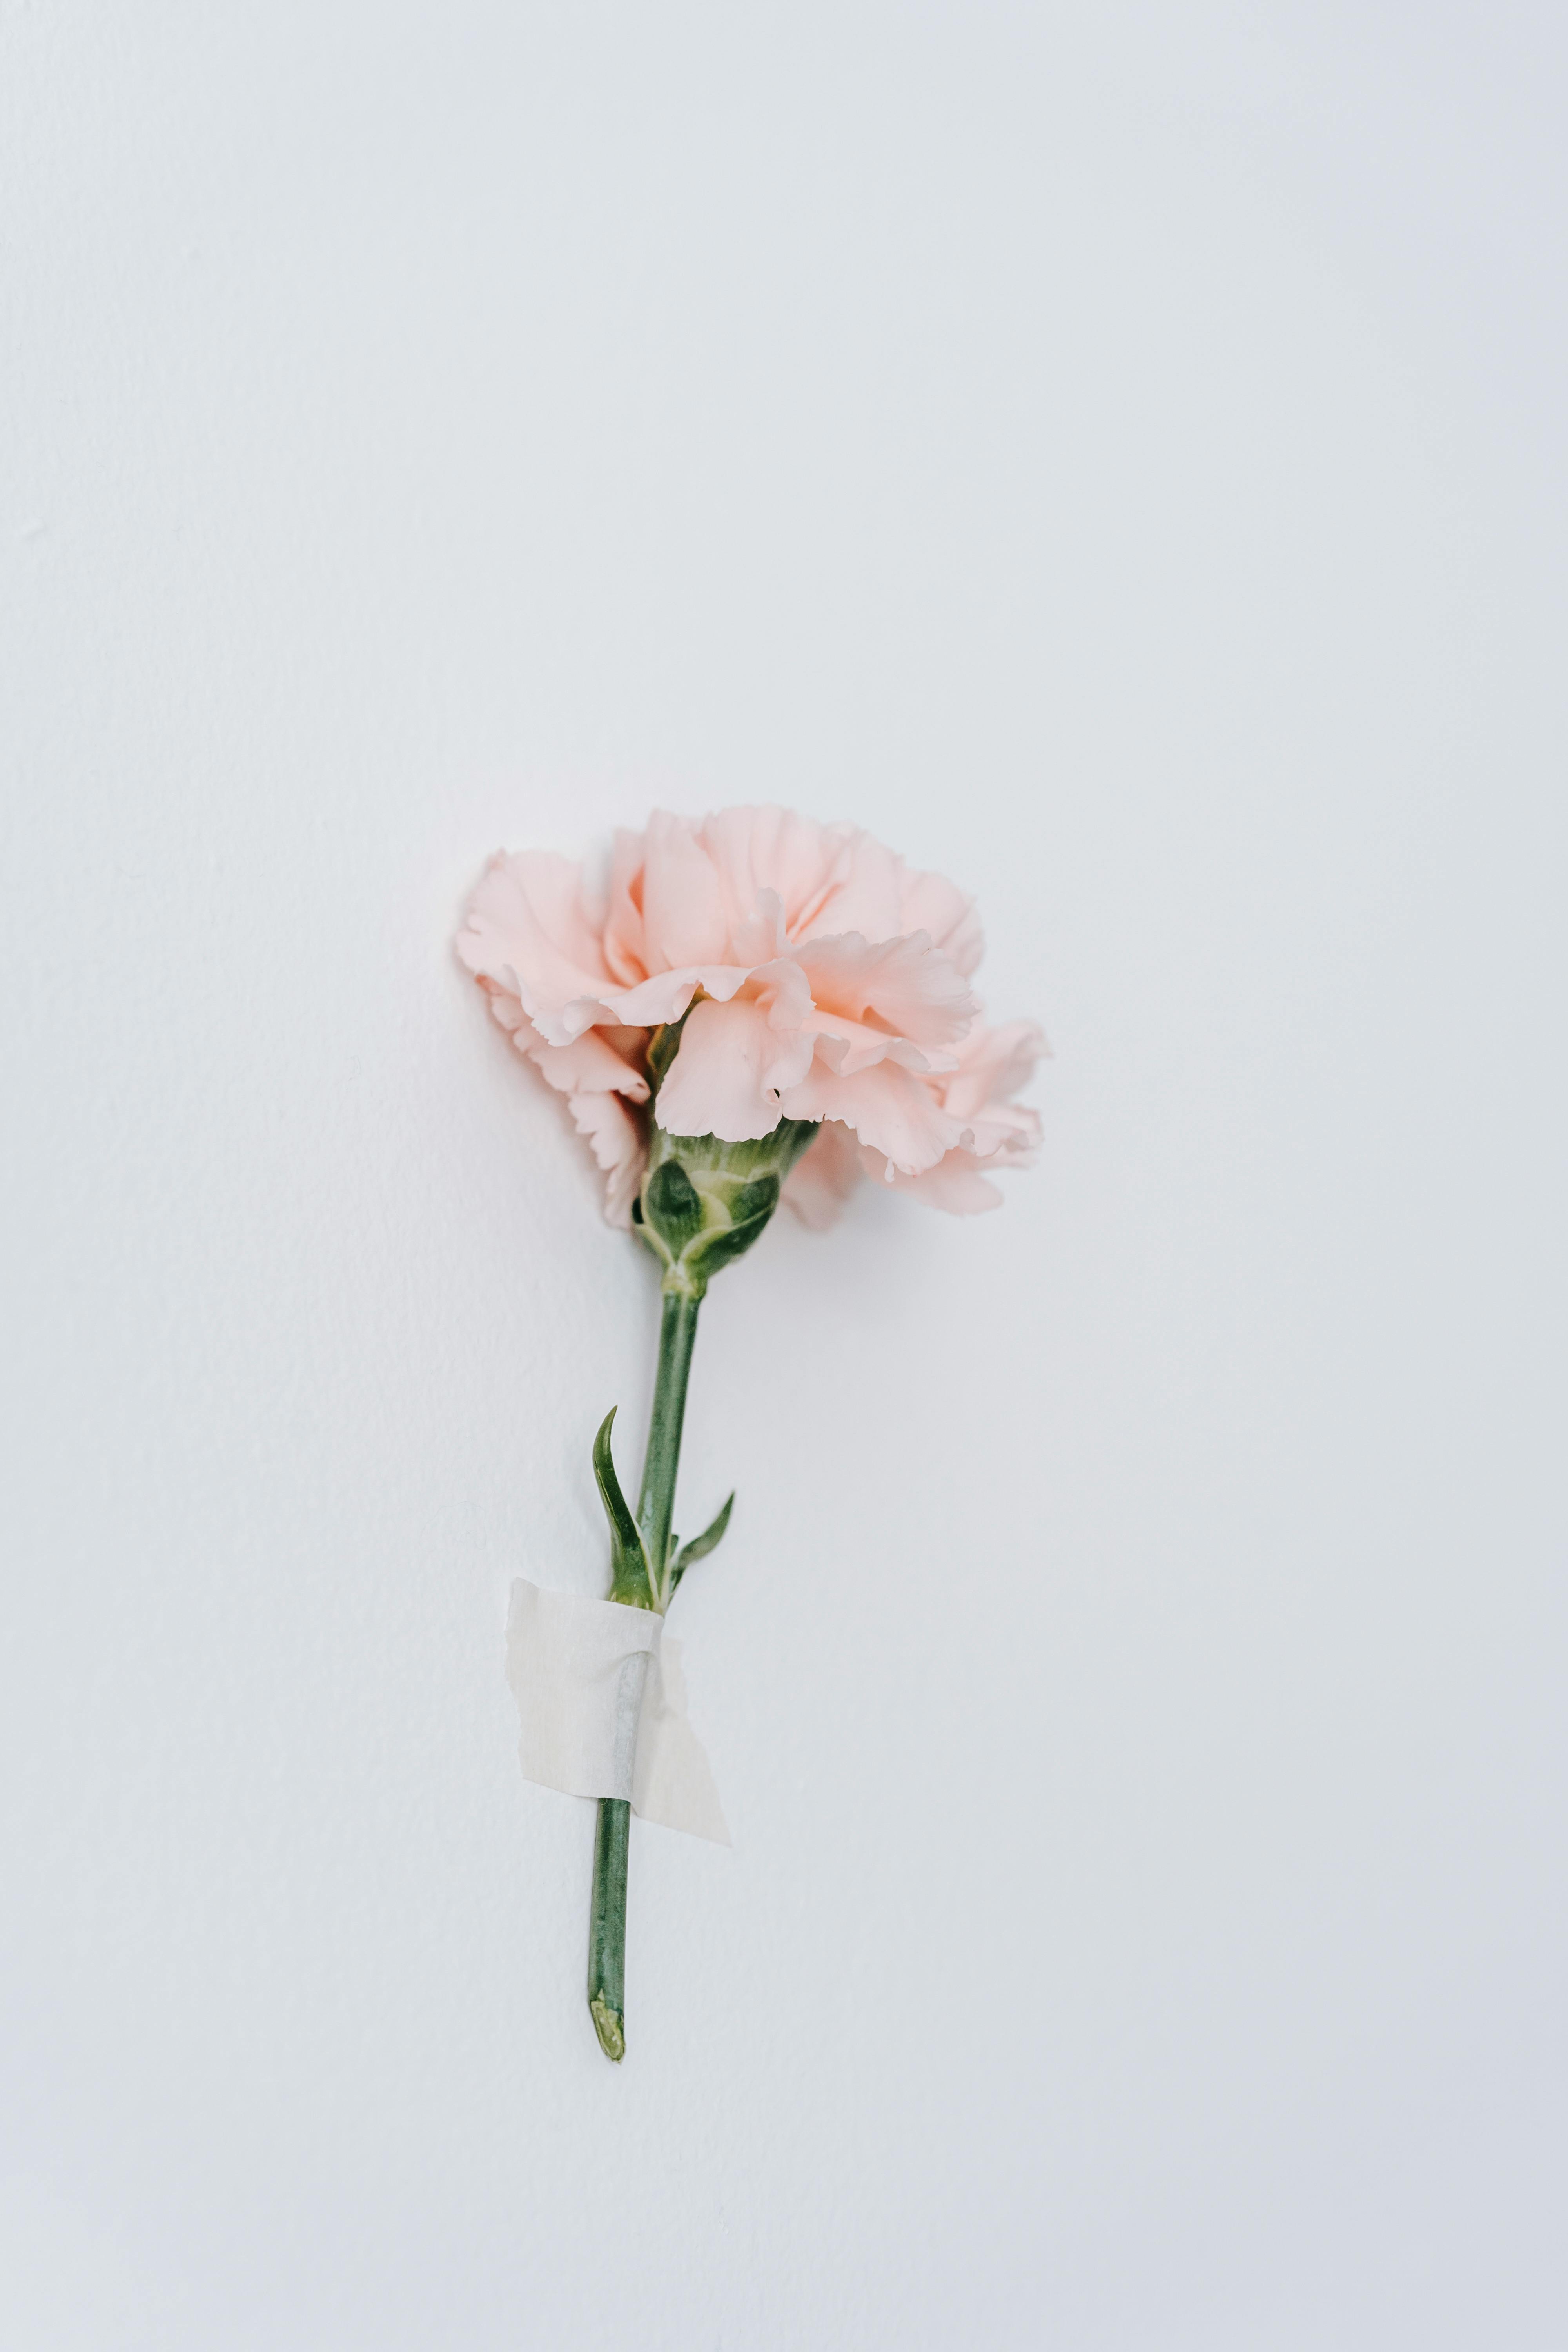 176+ Thousand Carnation Flower Royalty-Free Images, Stock Photos